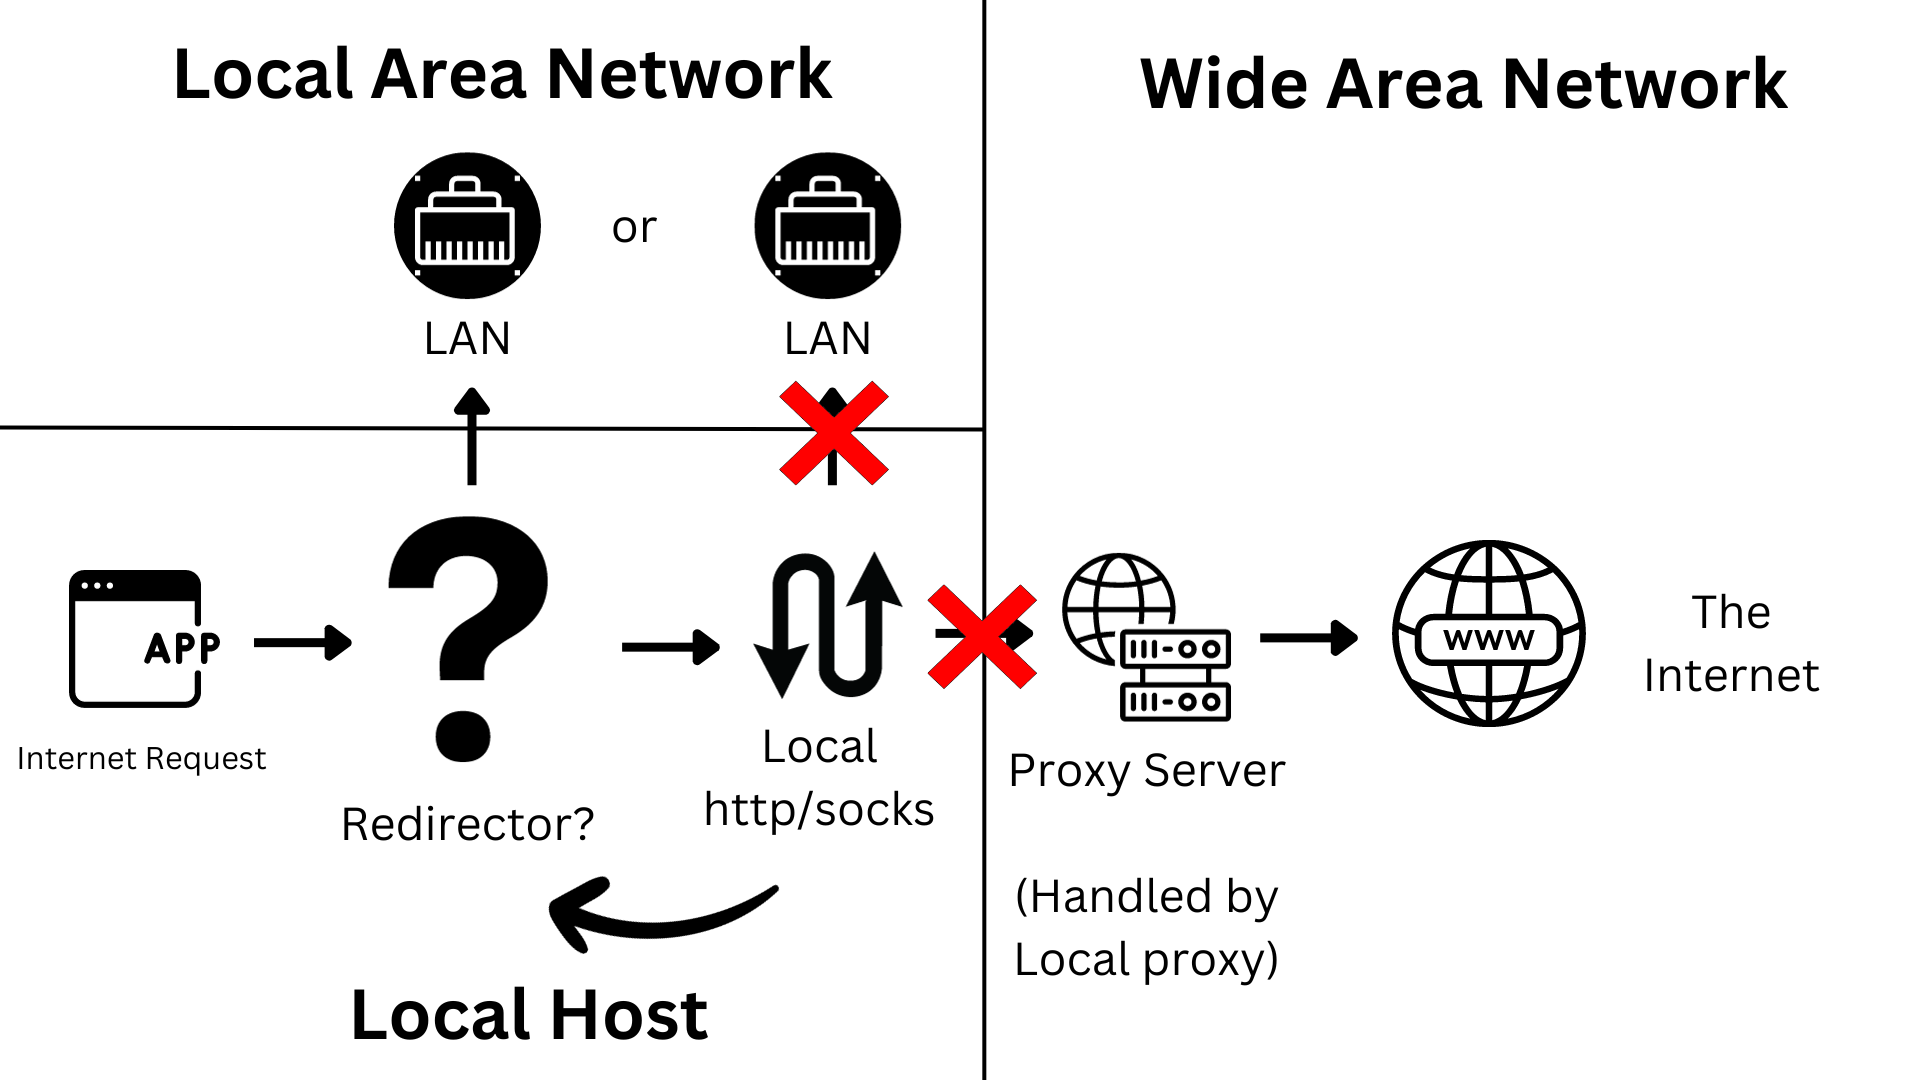 Network Topology to Avoid